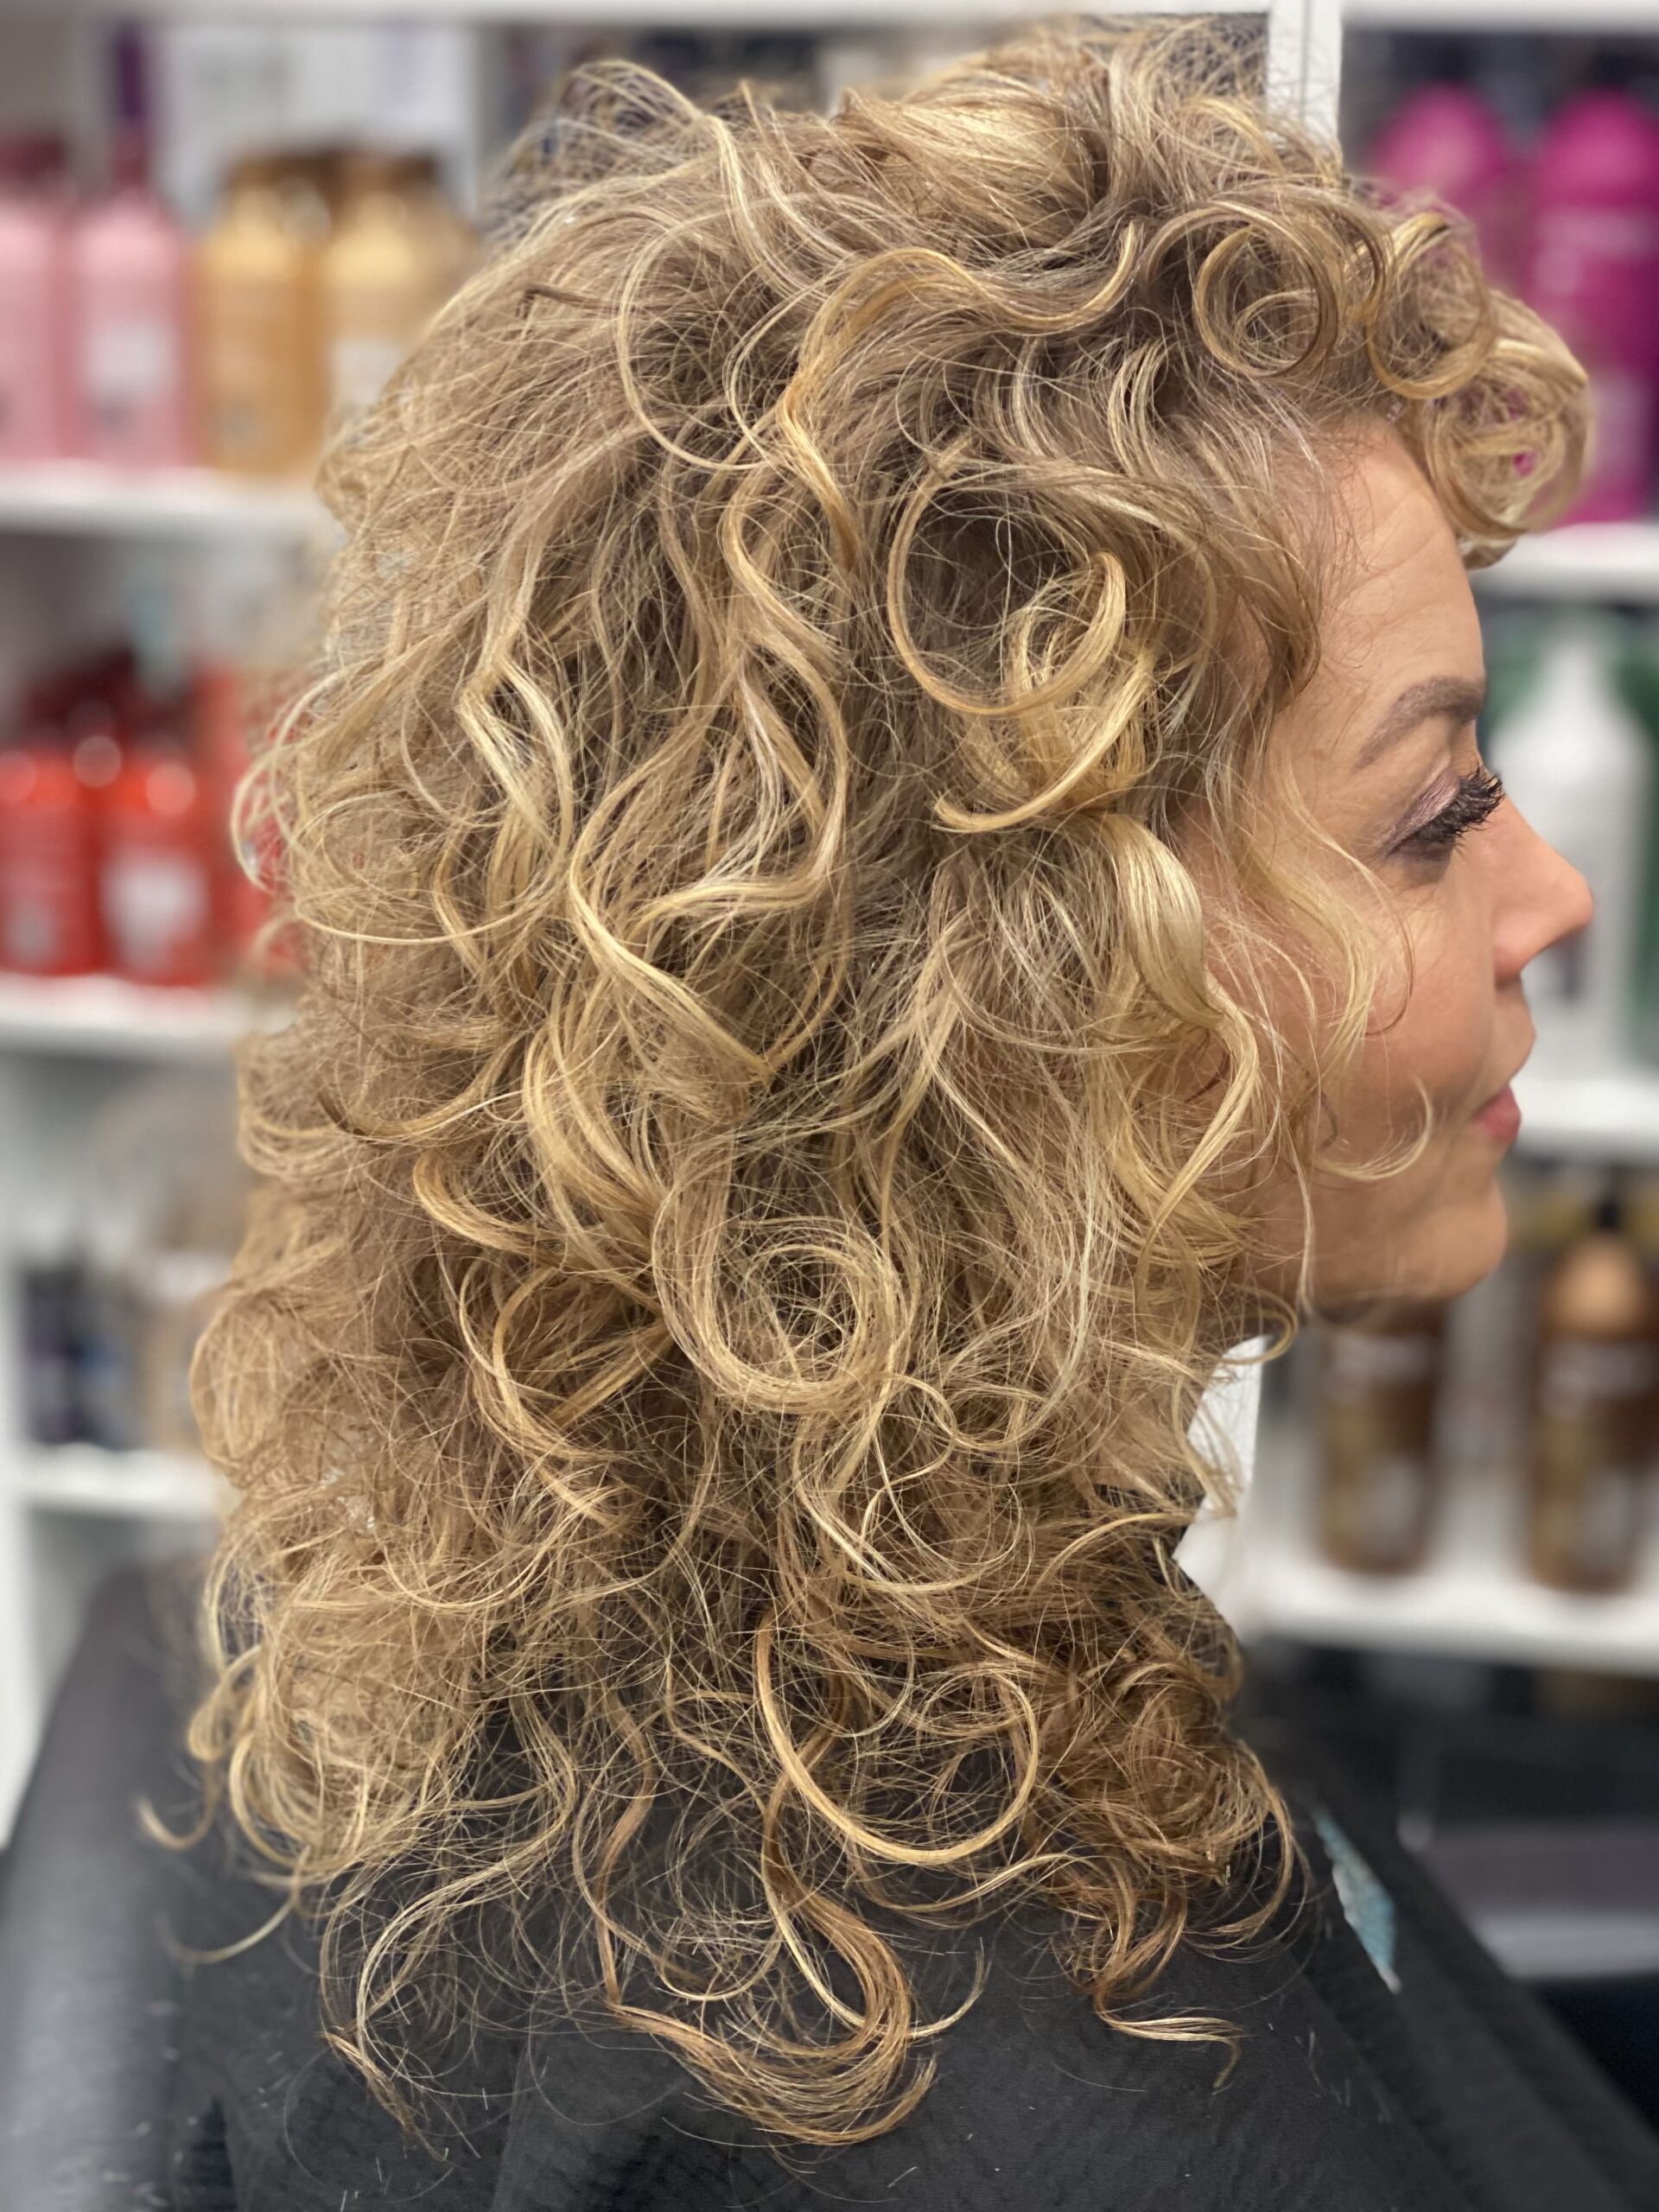 Hair Salon Near Me — Beautiful Hairstyle of Young Woman in Scottsdale, AZ